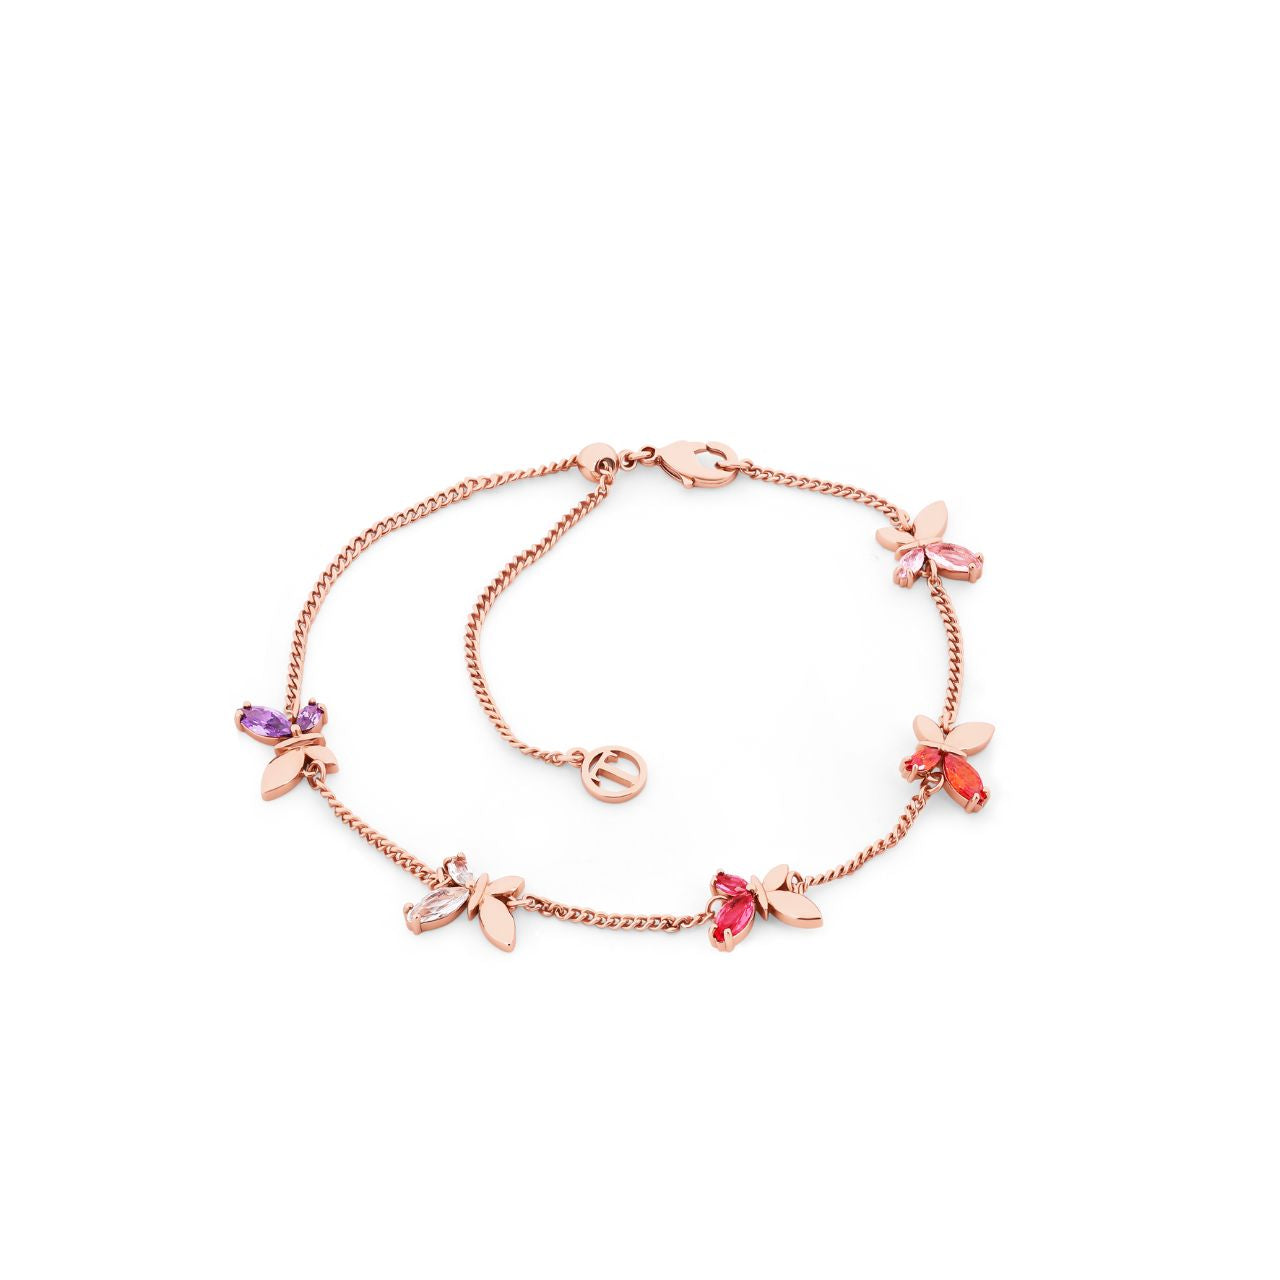 Rose Gold Multi Coloured Butterfly Bracelet by Tipperary Crystal  The Rose Gold Butterfly Bracelet by Tipperary Crystal is the perfect accessory to complement any look. This timeless design features rose gold and multi-coloured butterfly accents, creating a unique and elegant piece. The bracelet is crafted from high-quality, durable materials, ensuring a long-lasting accessory you'll love to wear.